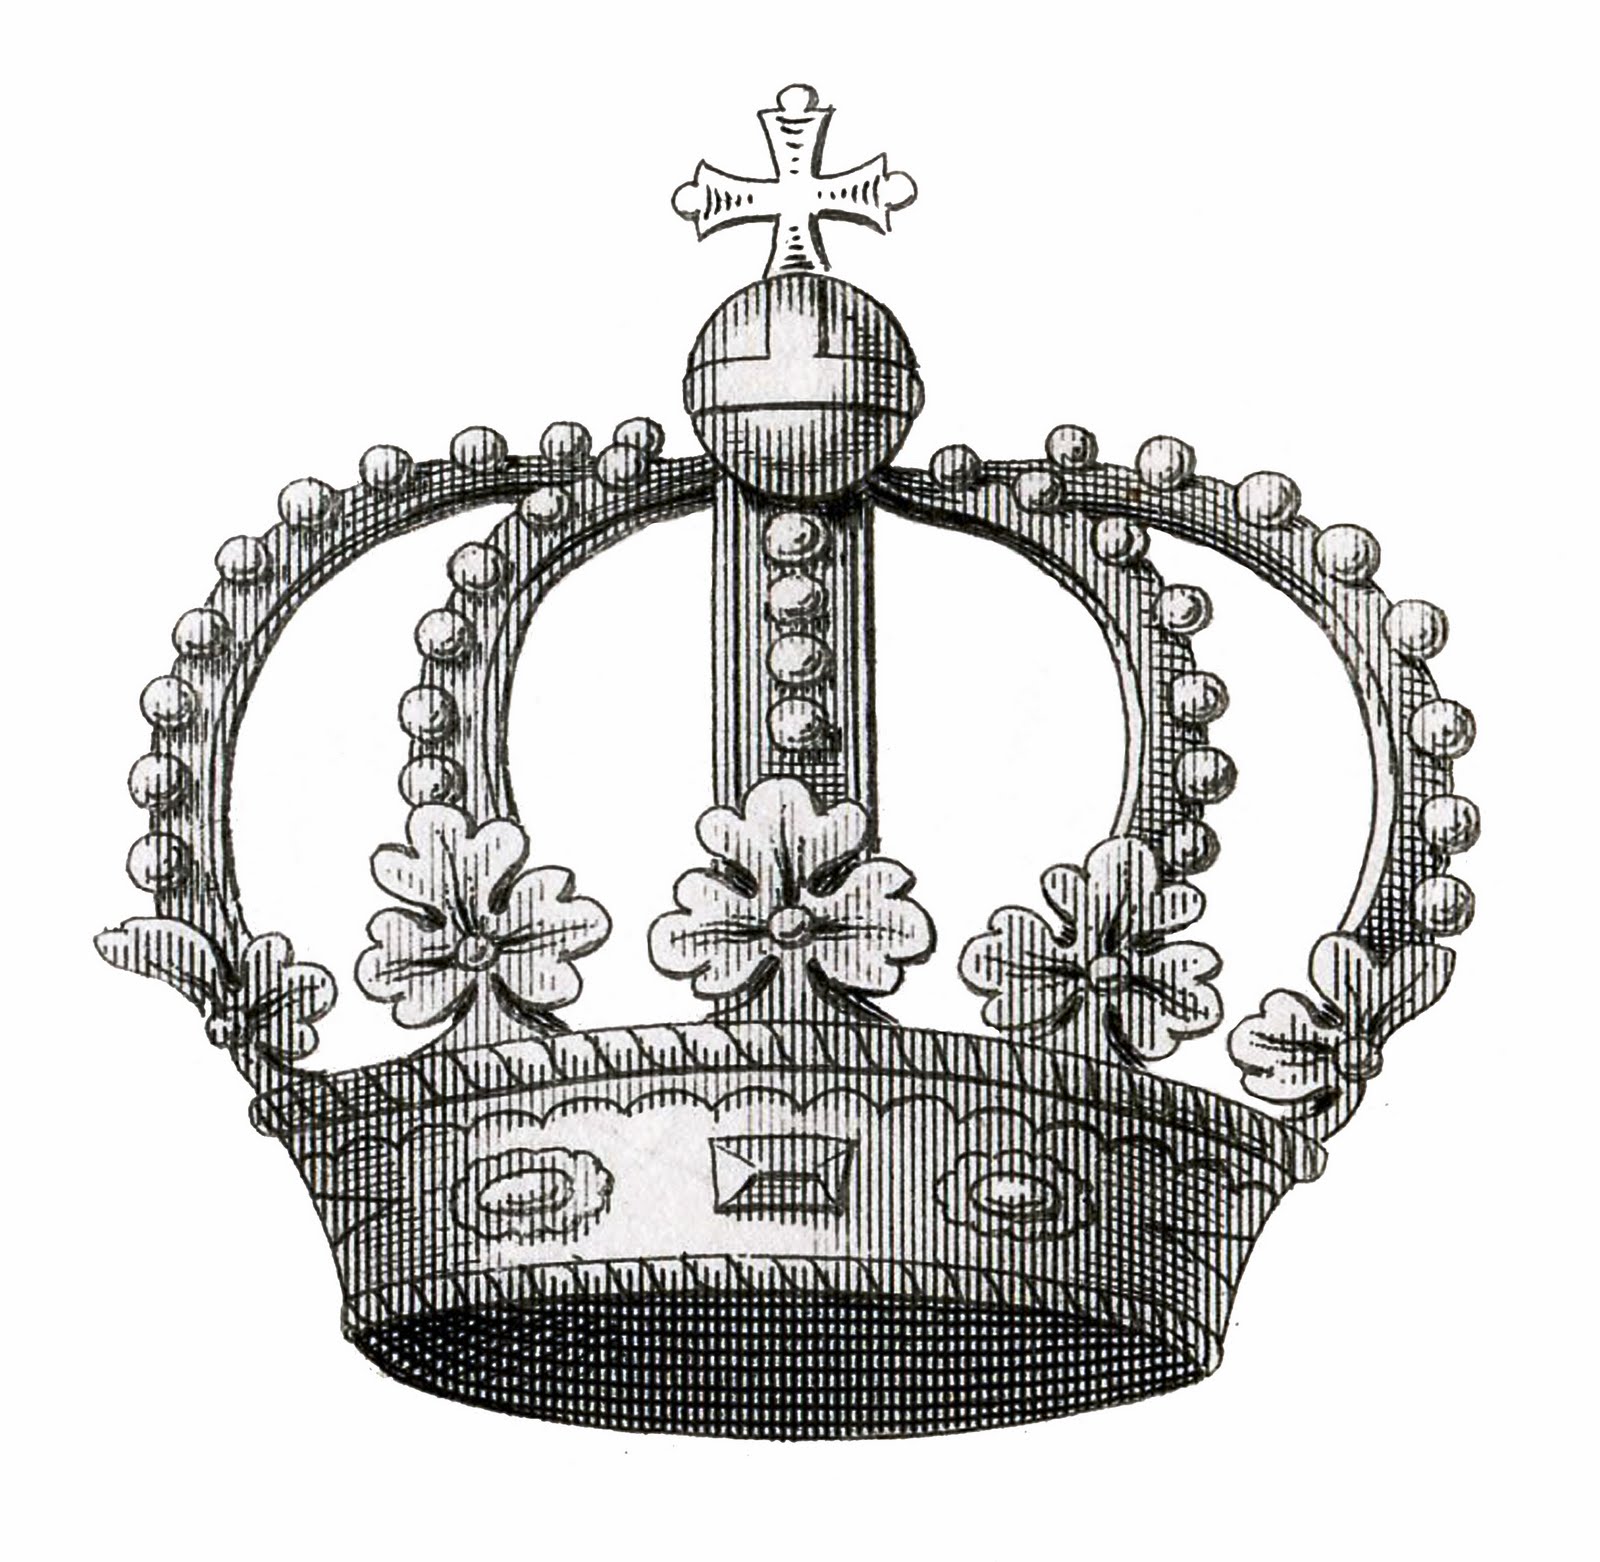 Vintage Crown Image Download - The Graphics Fairy